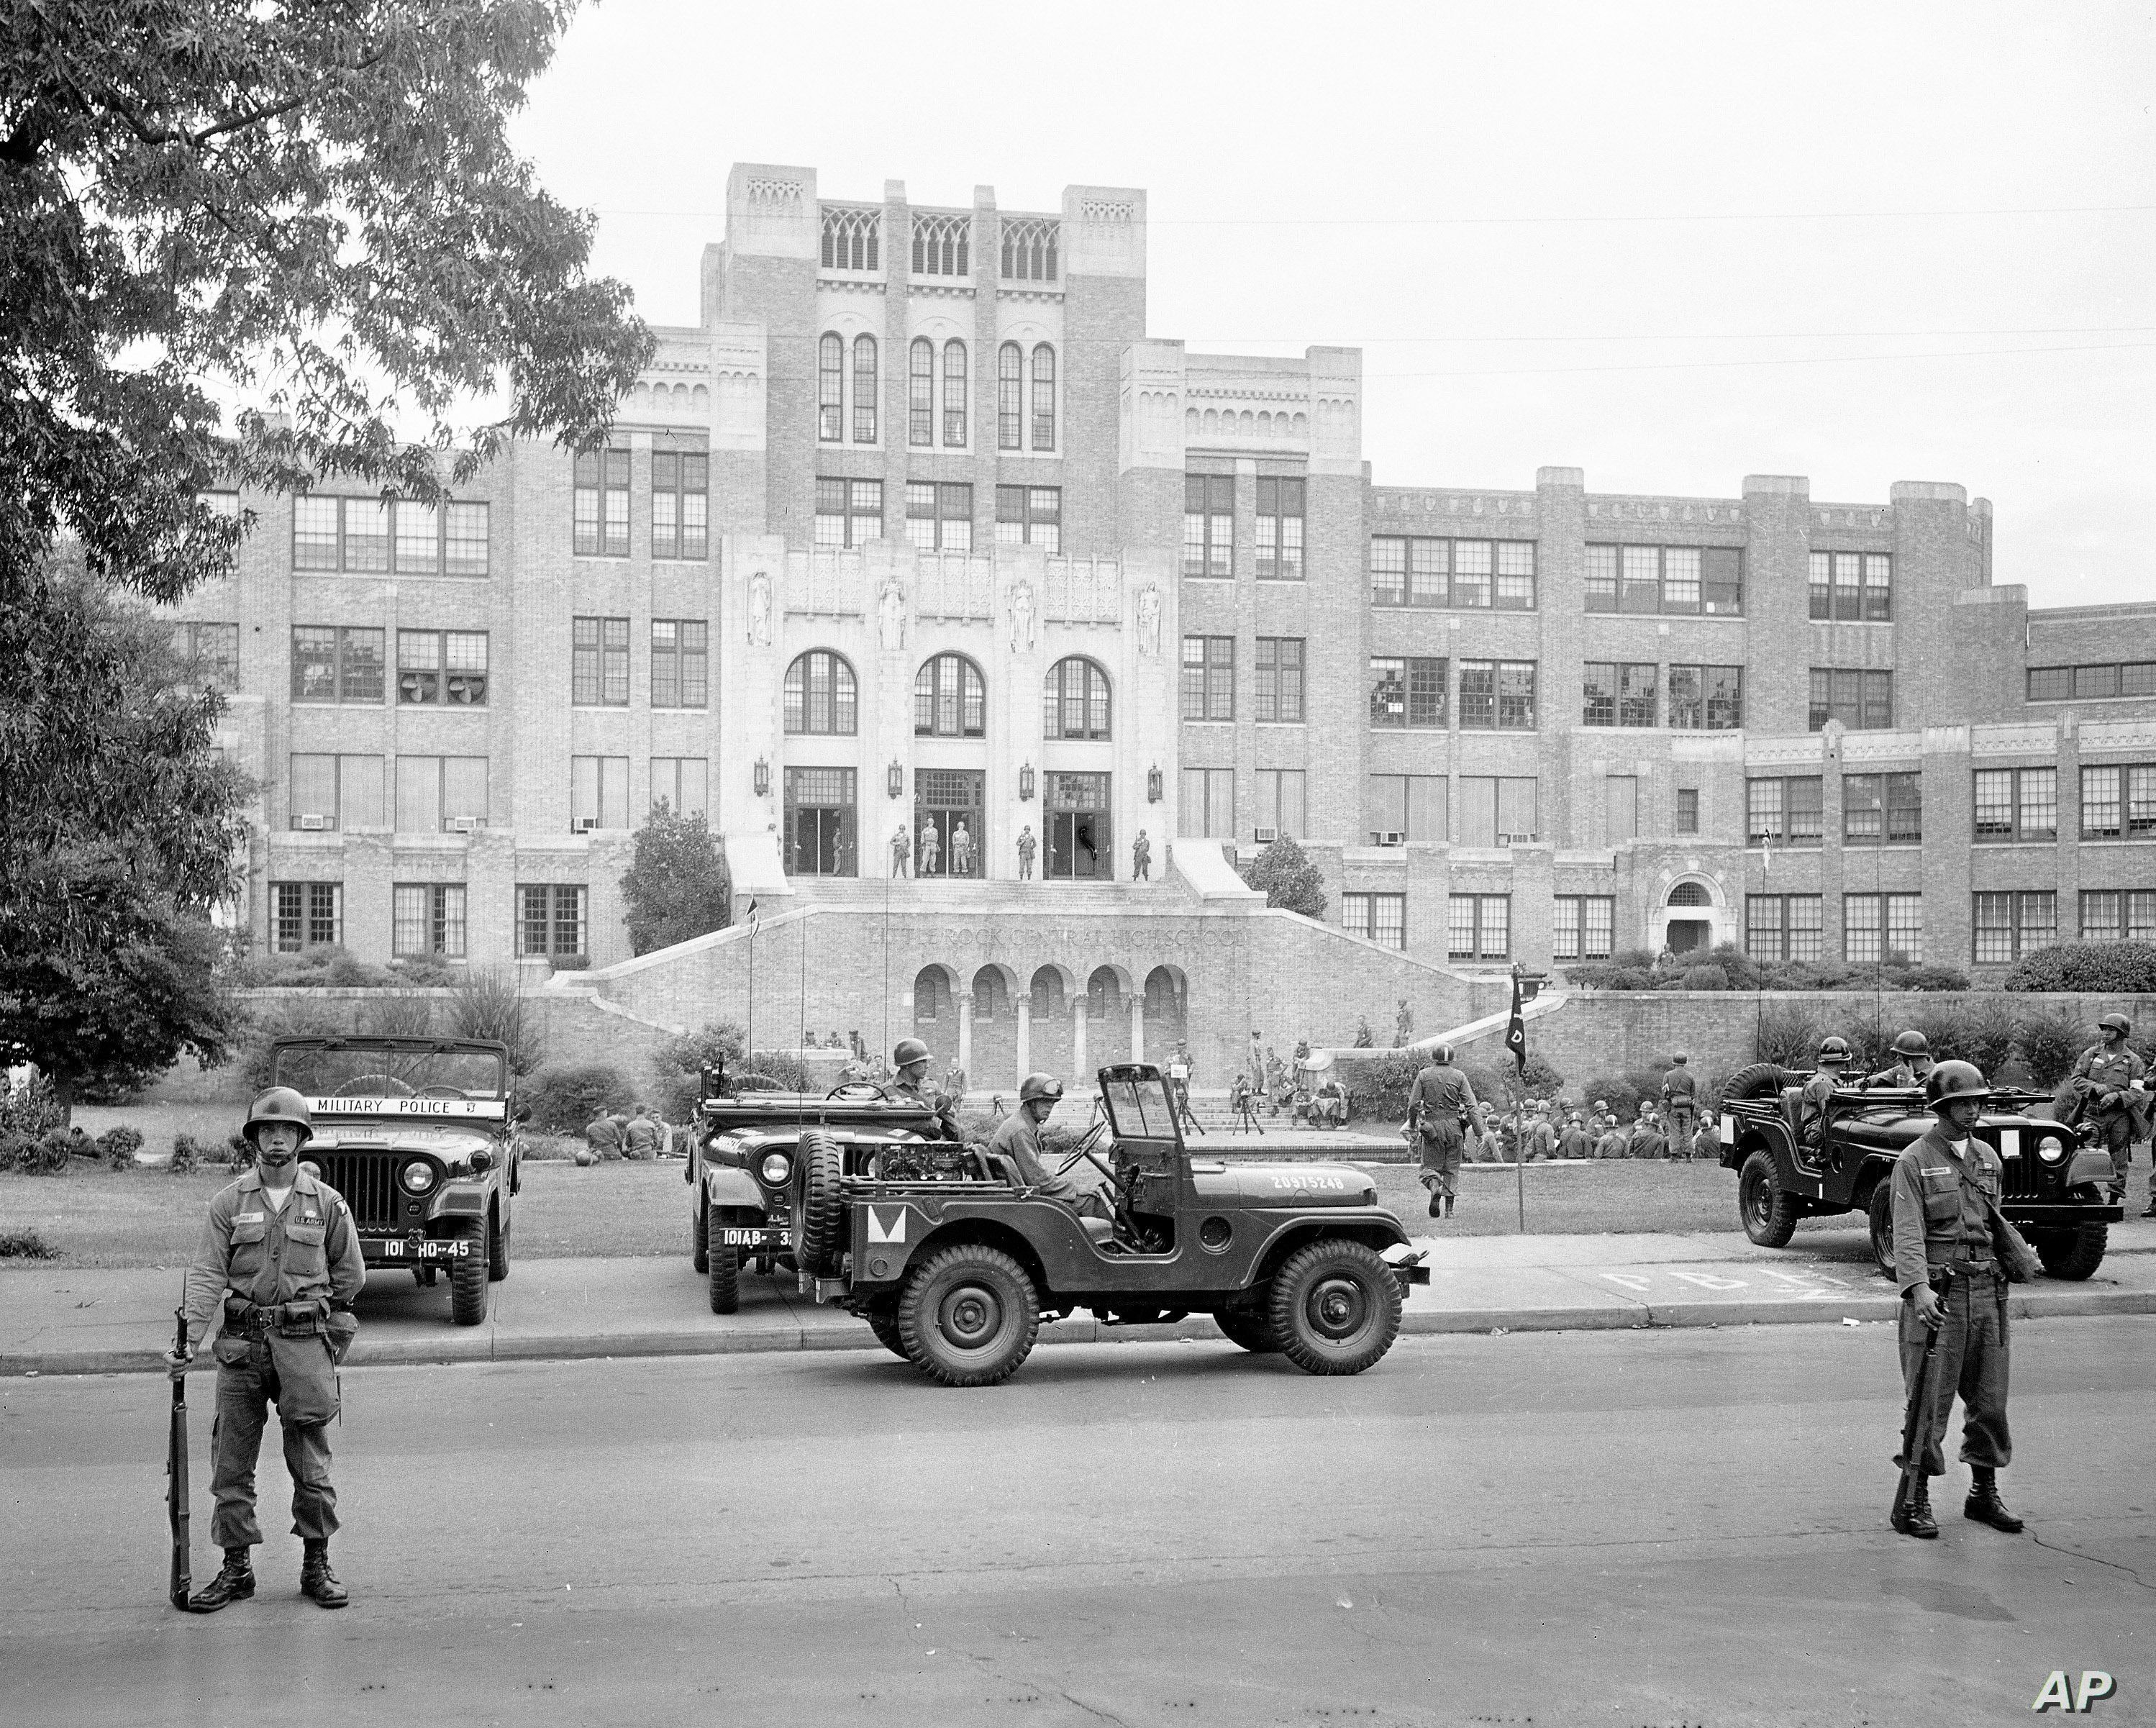 In this Sept. 26, 1957, file photo, members of the 101st Airborne Division take up positions outside Central High School in Little Rock, Ark., after President Dwight D. Eisenhower ordered them into the city to enforce integration at the school. 